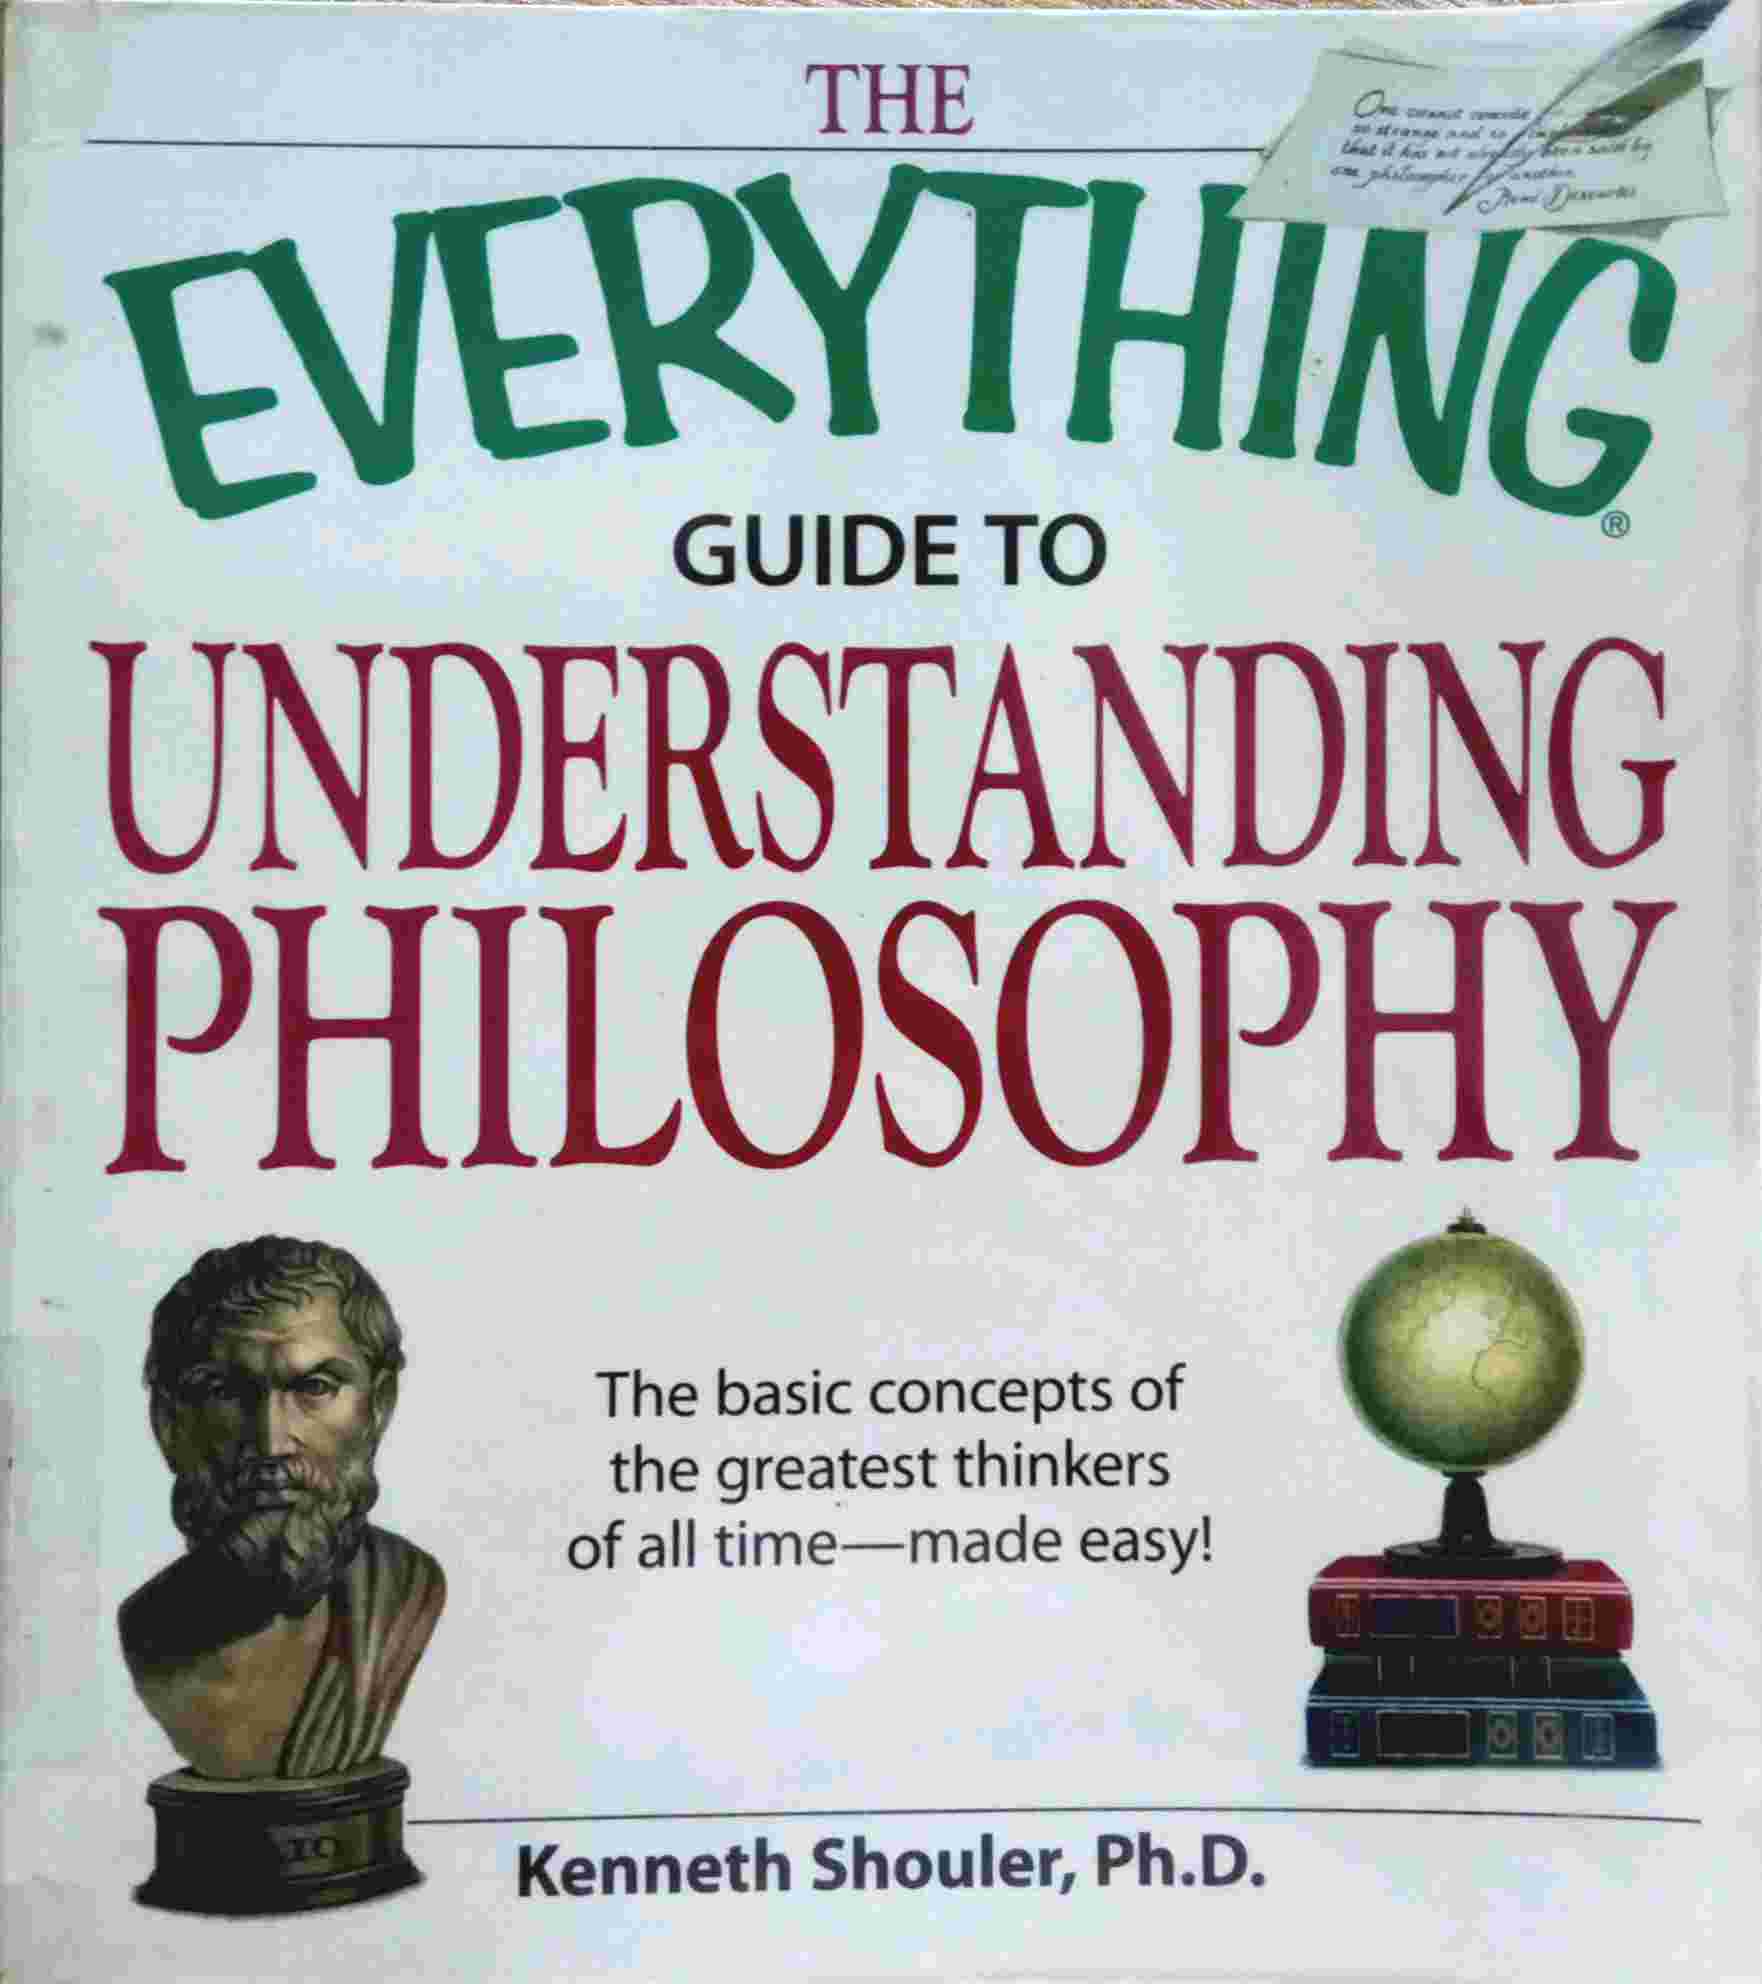 THE EVERYTHING GIUDE TO UNDERSTANDING PHILOSOPHY